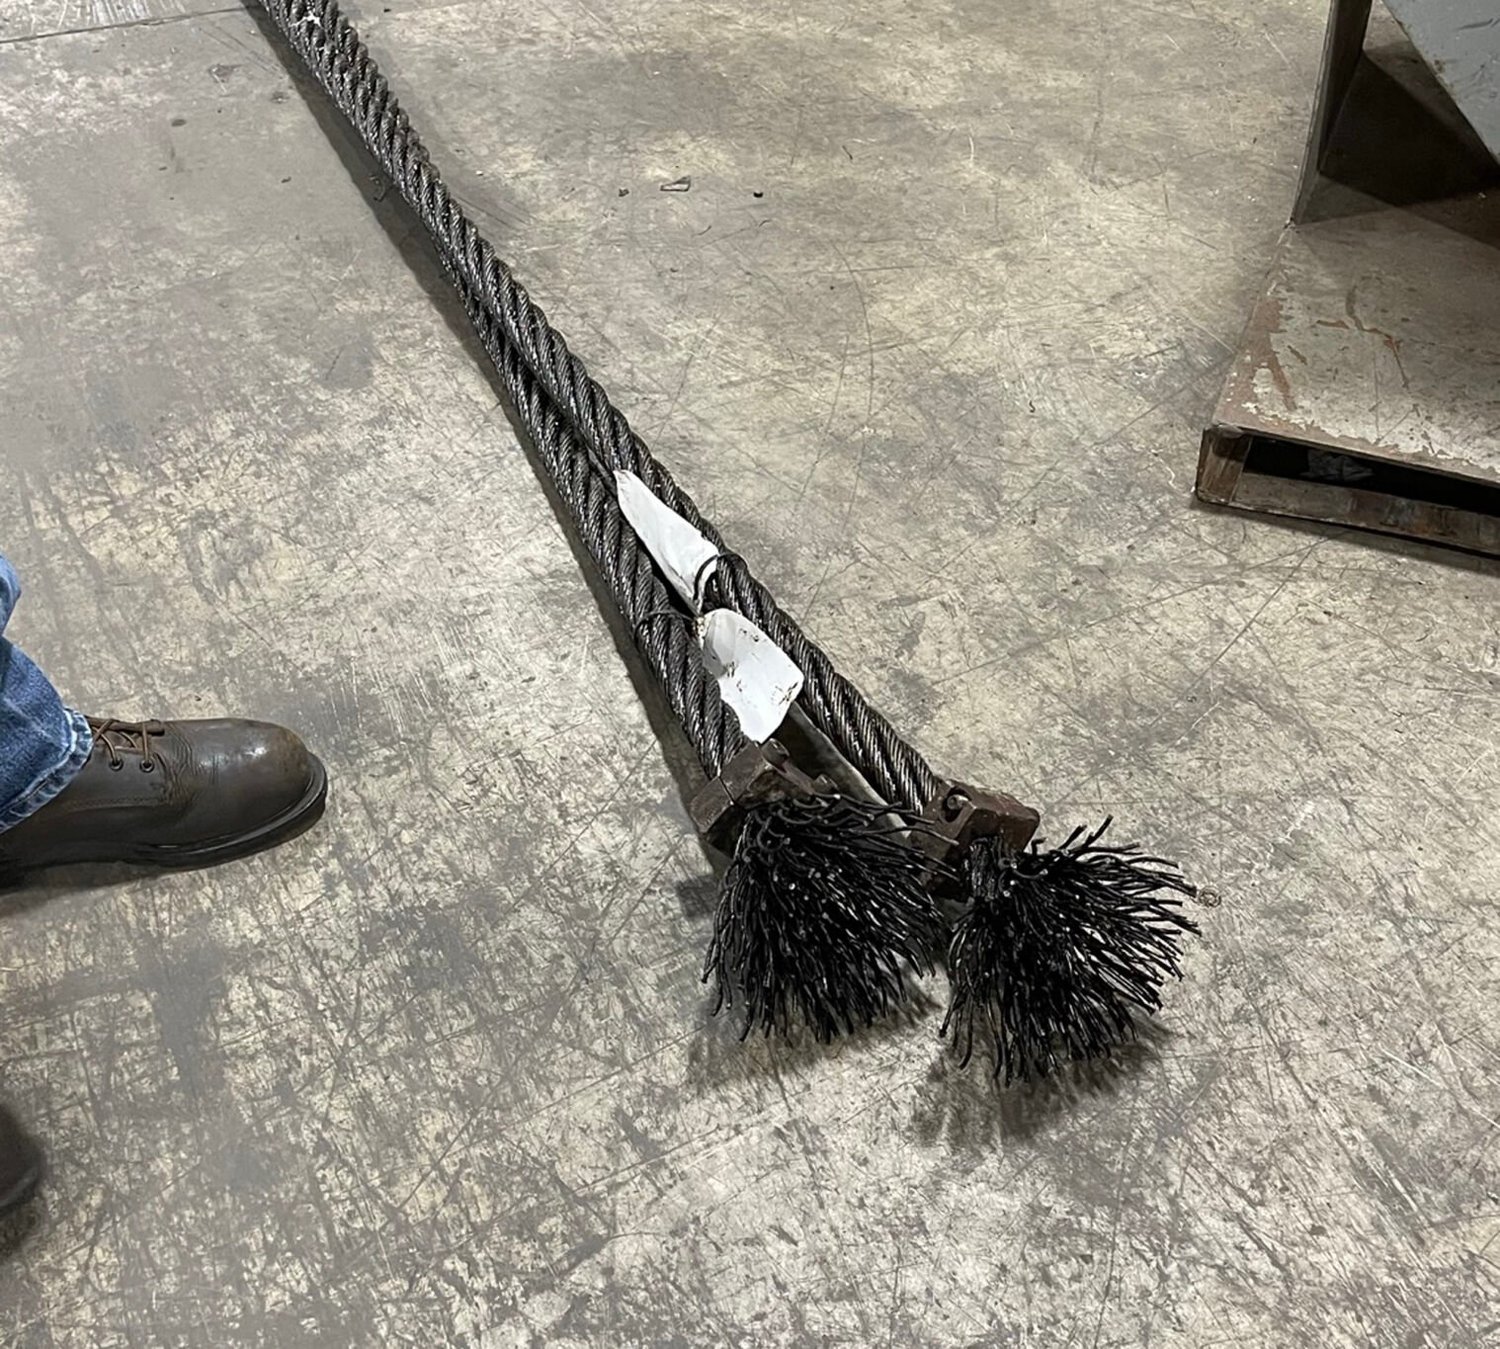 Example of “brooming” wire rope in preparation for attached an end termination